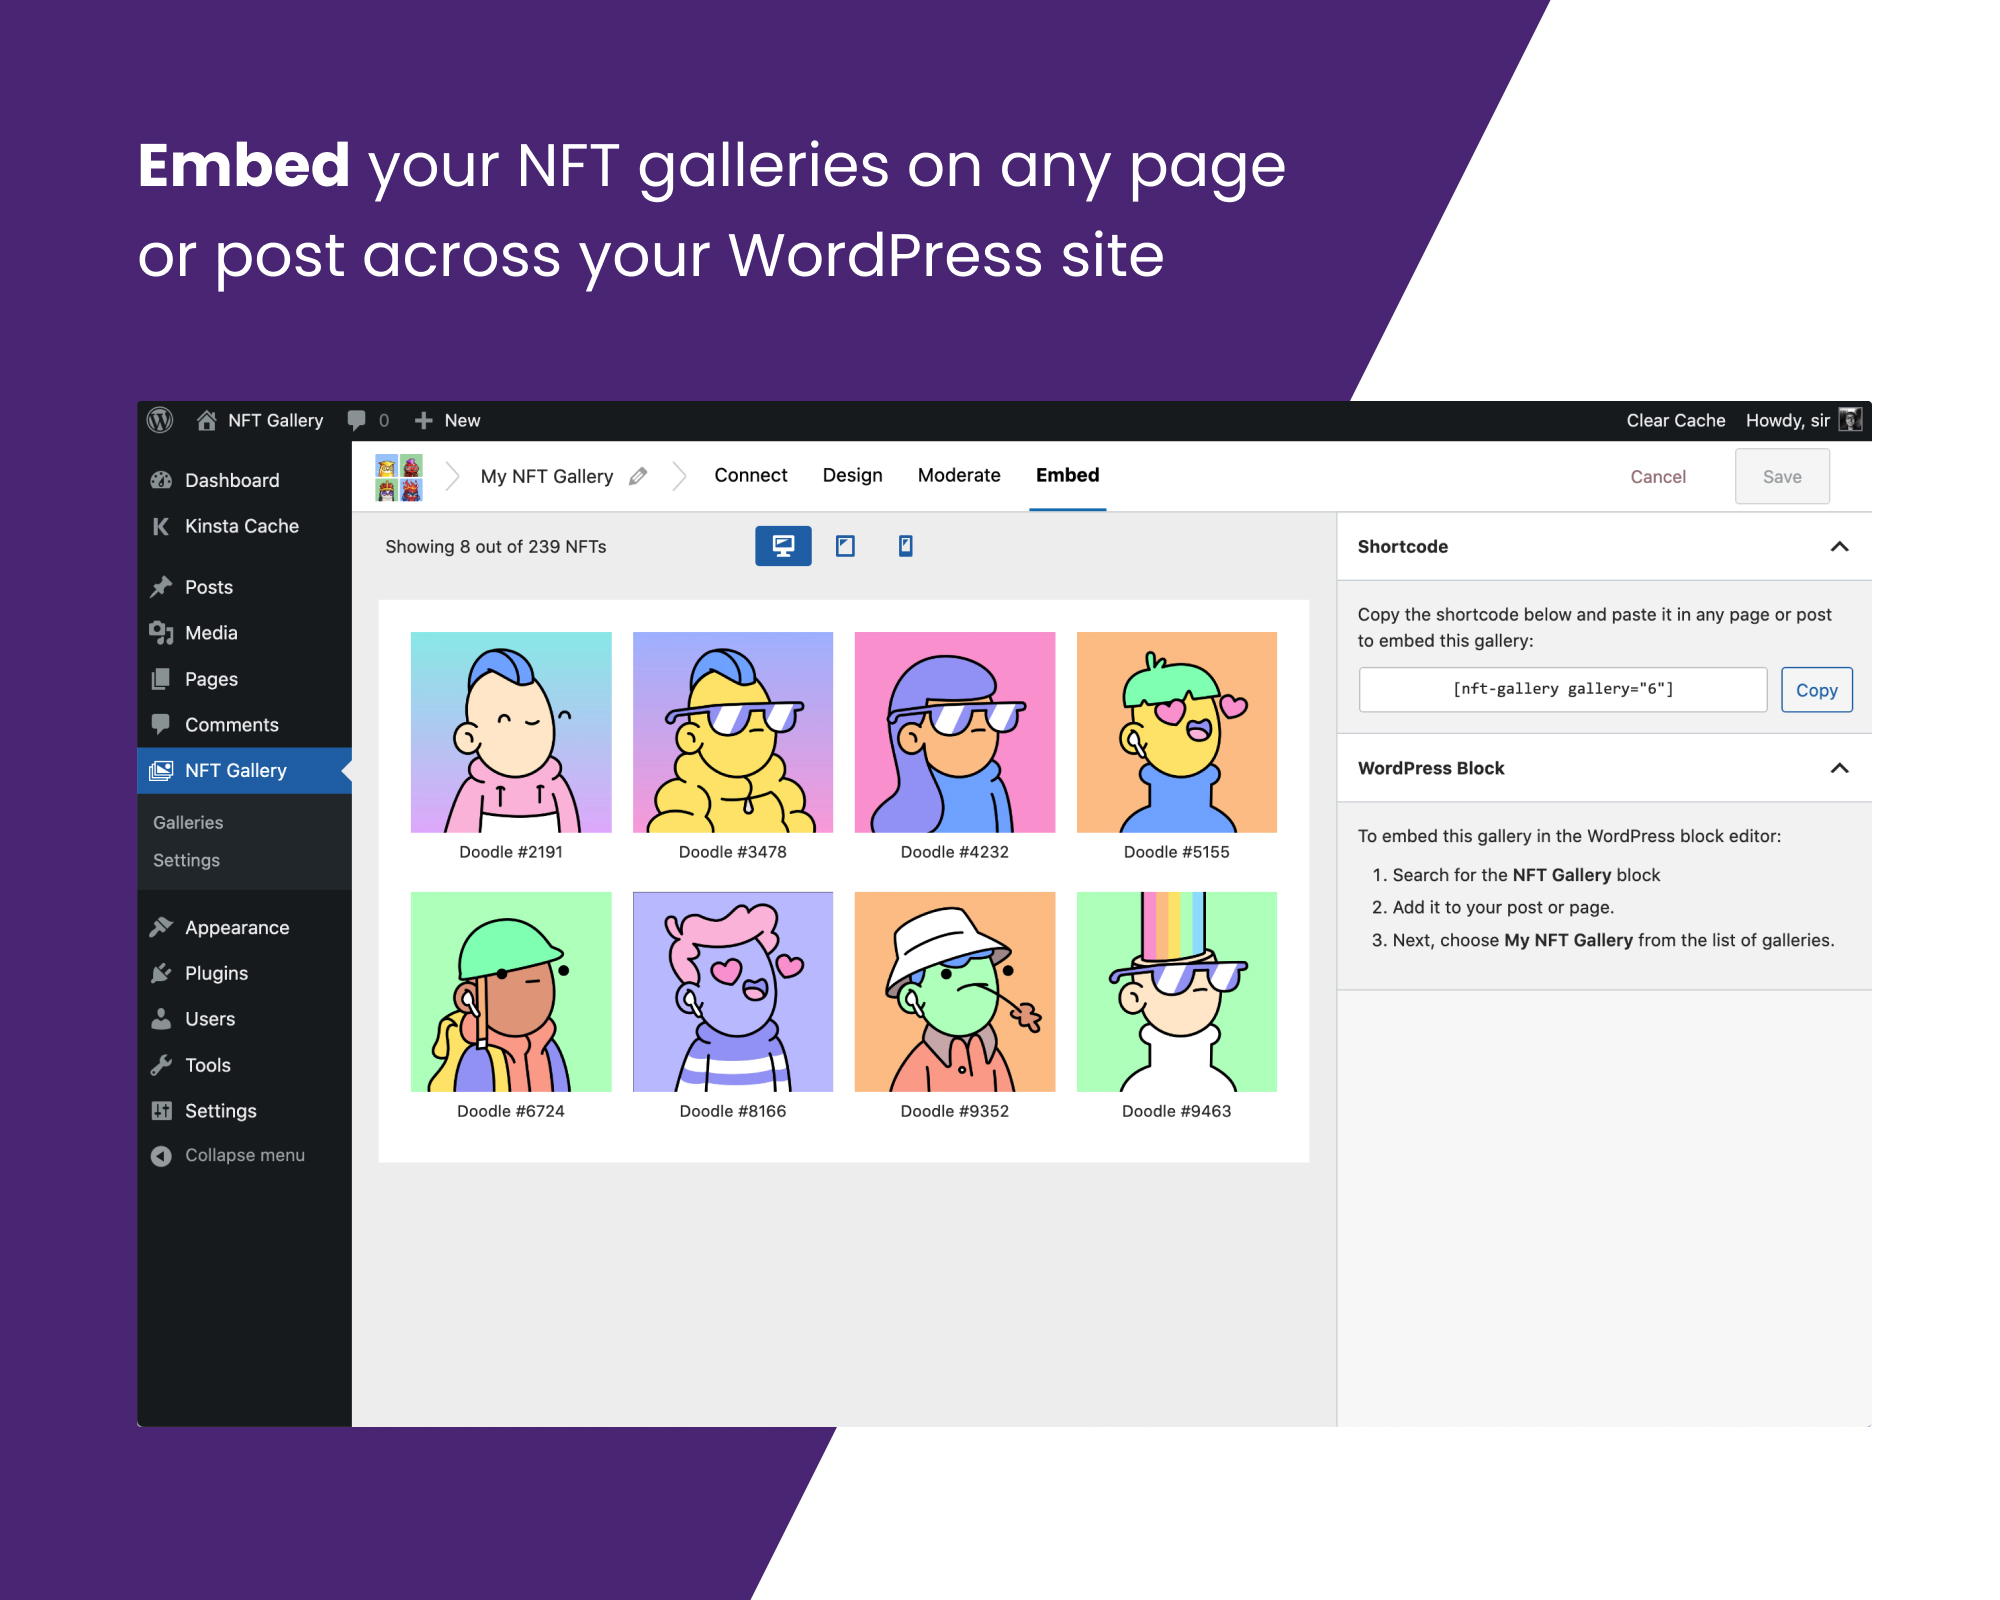 Embed your NFT galleries on any page or post across your website.